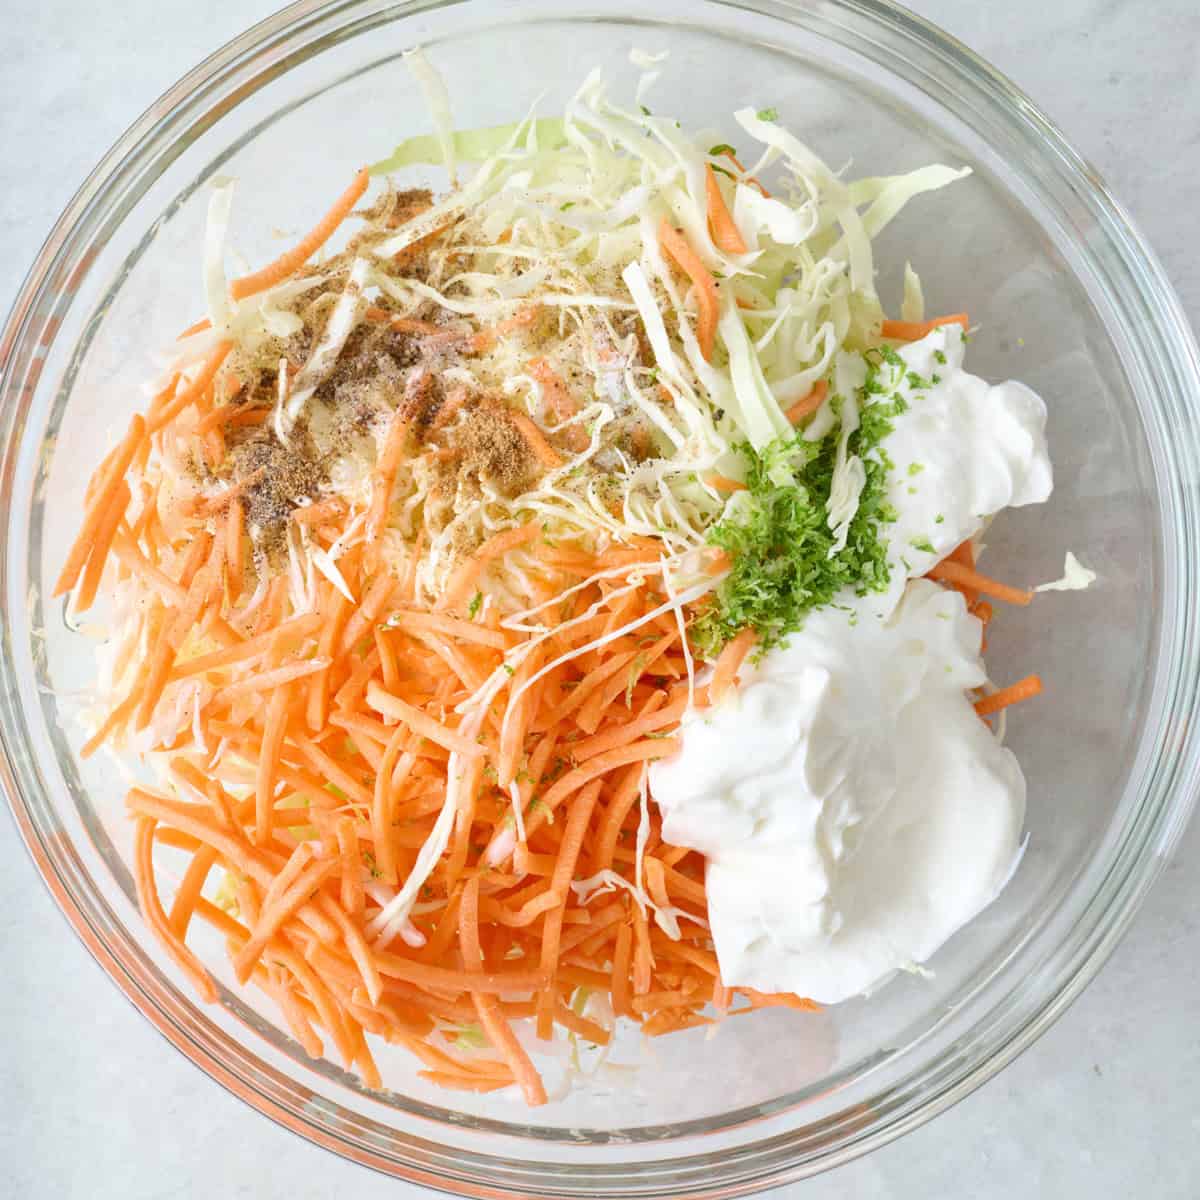 Shredded cabbage, carrots, and a Greek yogurt dressing in a large glass bowl.